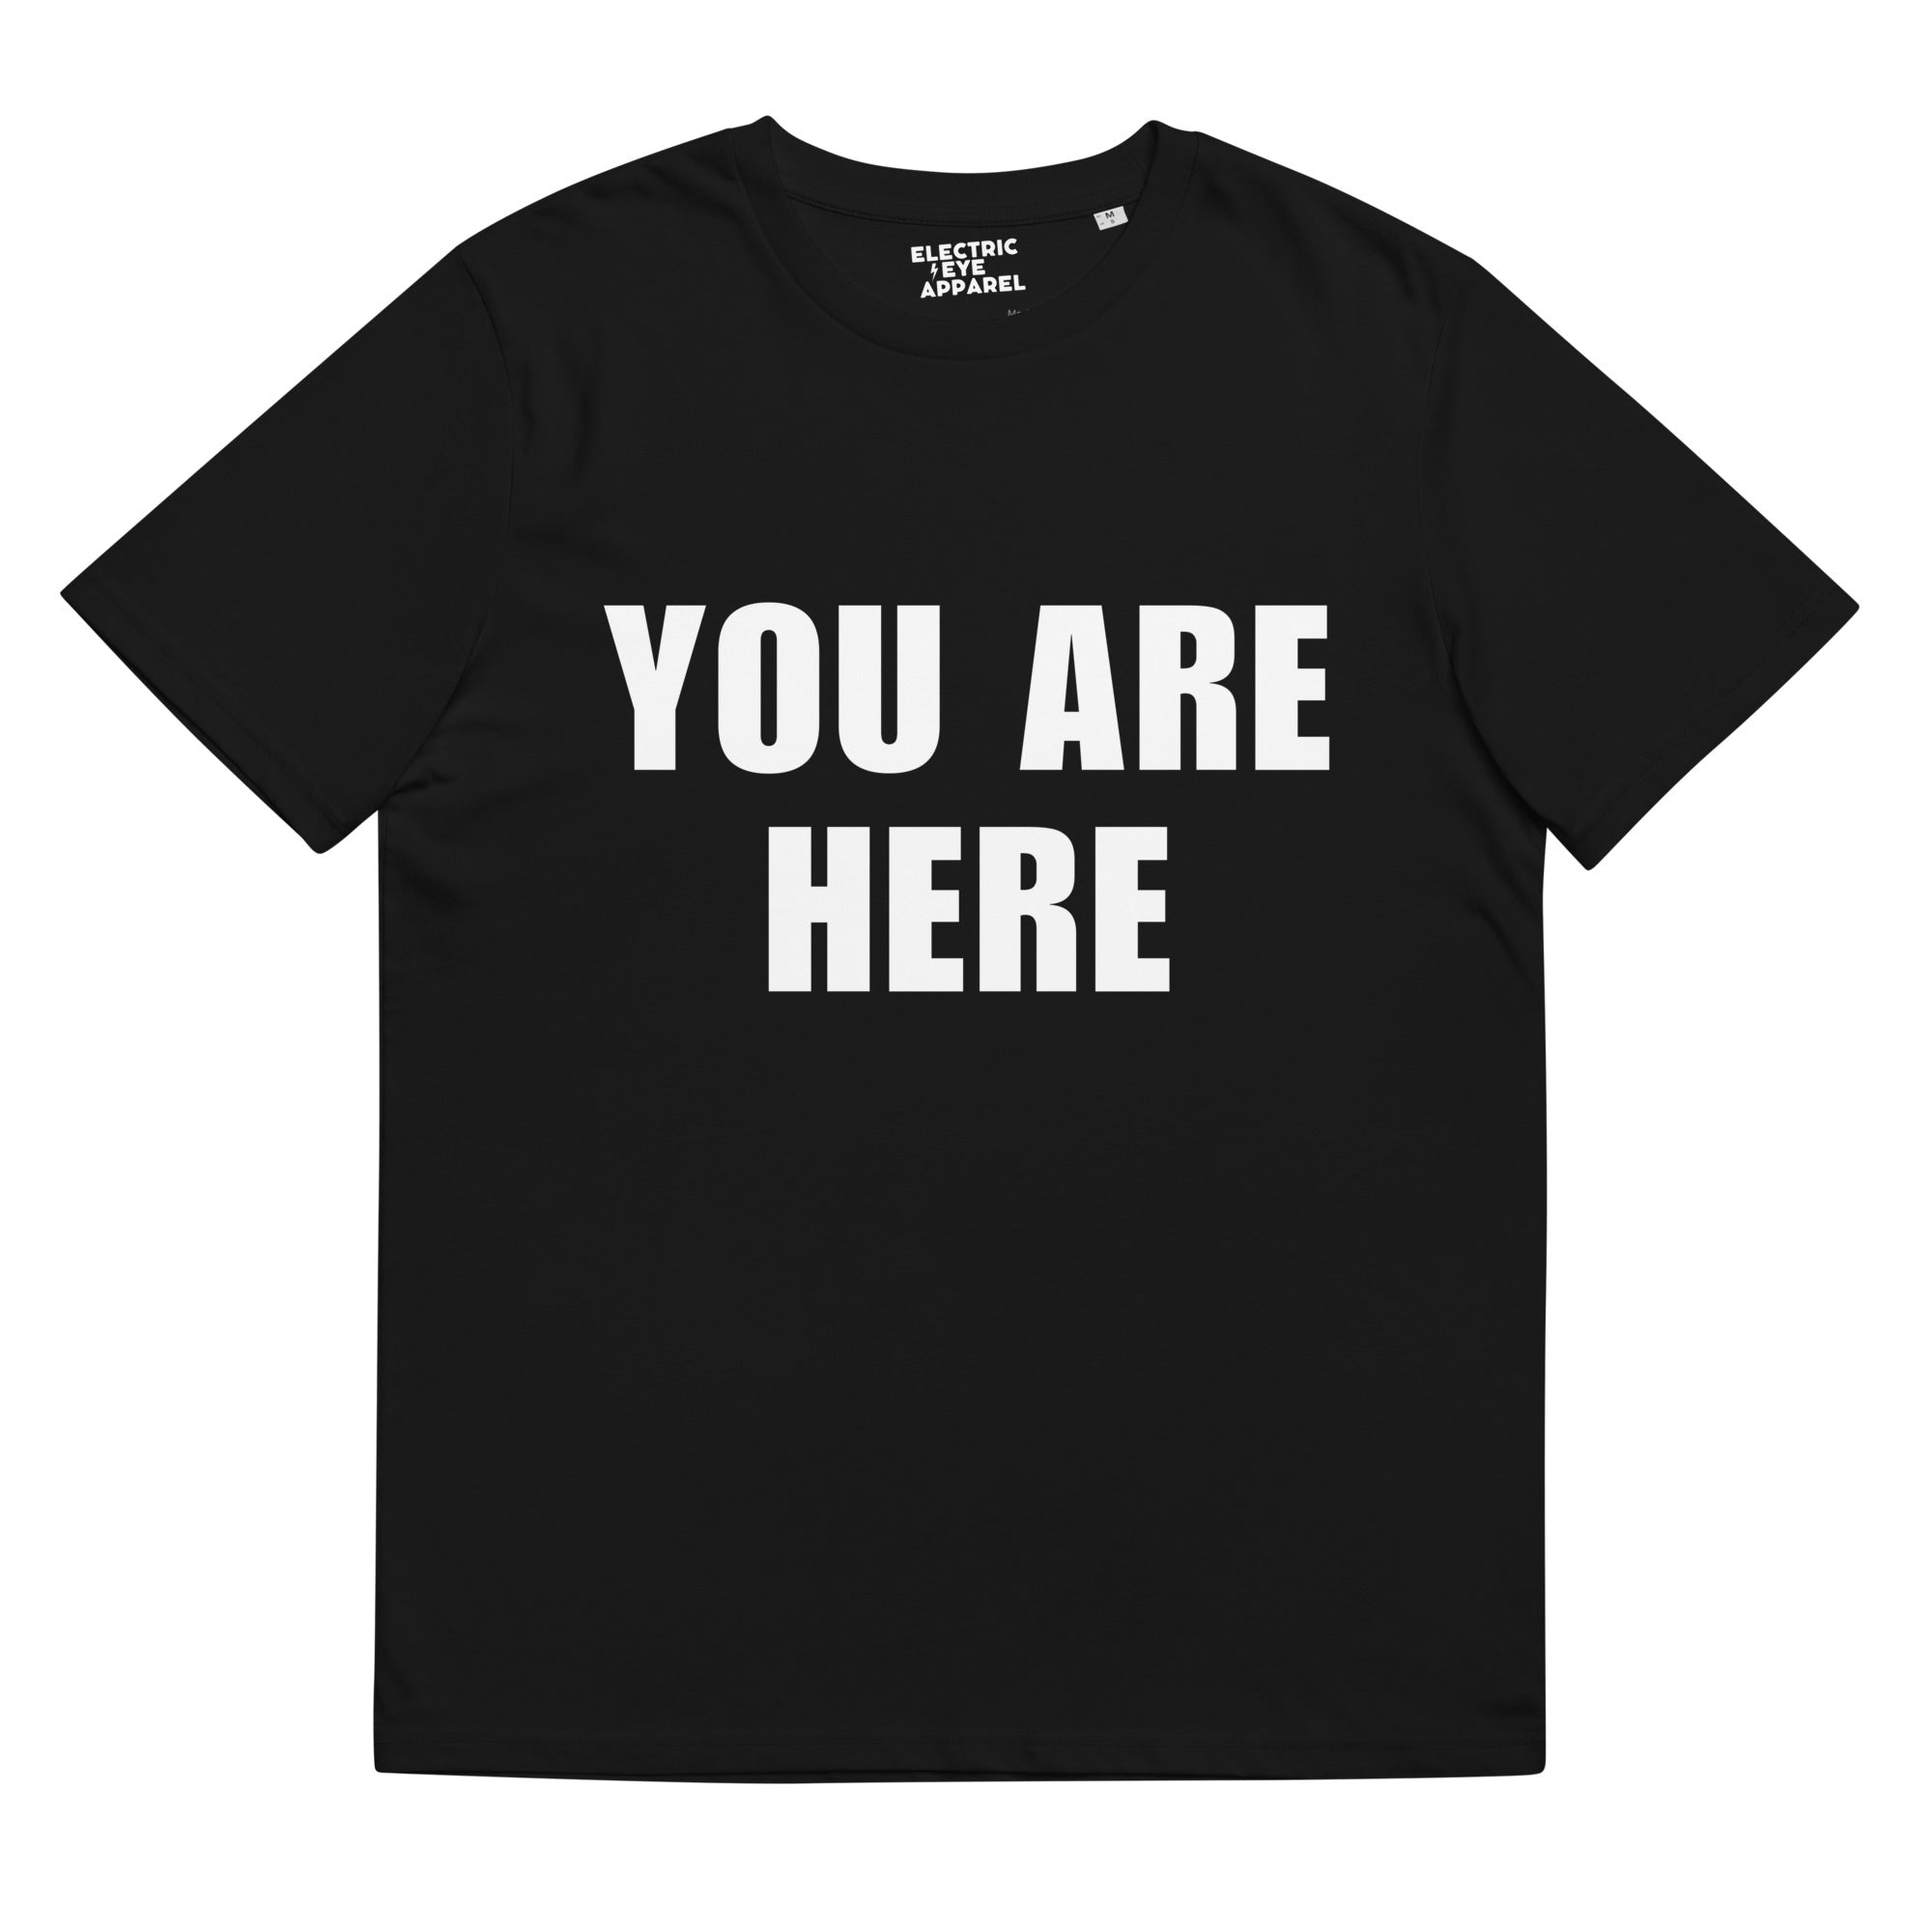 John Lennon Inspired 'YOU ARE HERE' Premium Printed Vintage 70s Style Unisex 100% soft organic cotton t-shirt